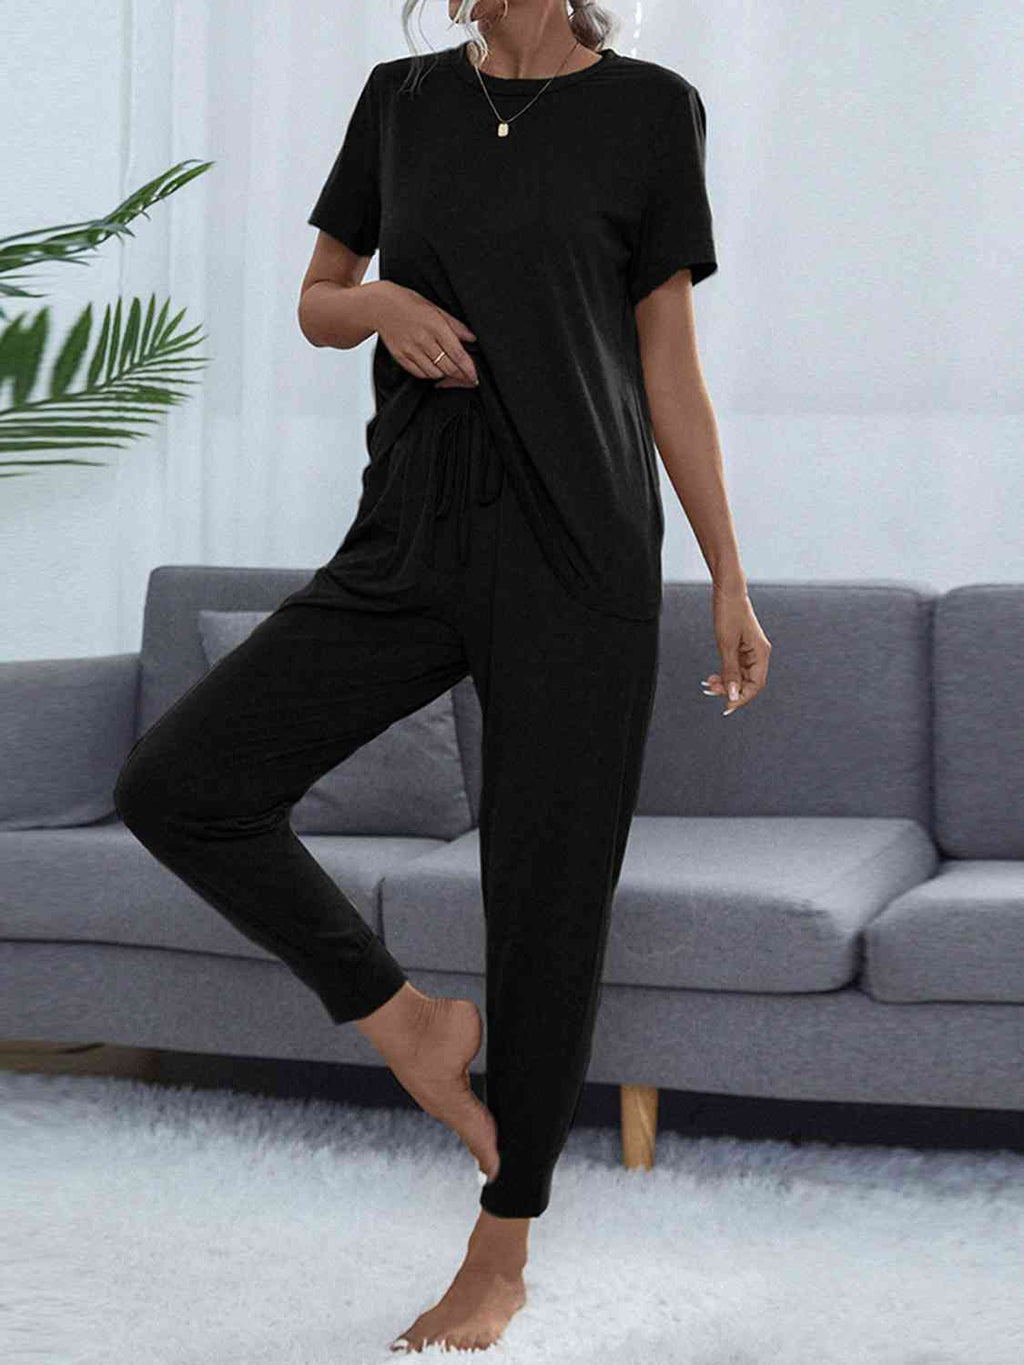 Round Neck Short Sleeve Top and Pants Lounge Set (5 Colors) Loungewear Krazy Heart Designs Boutique Black XS 